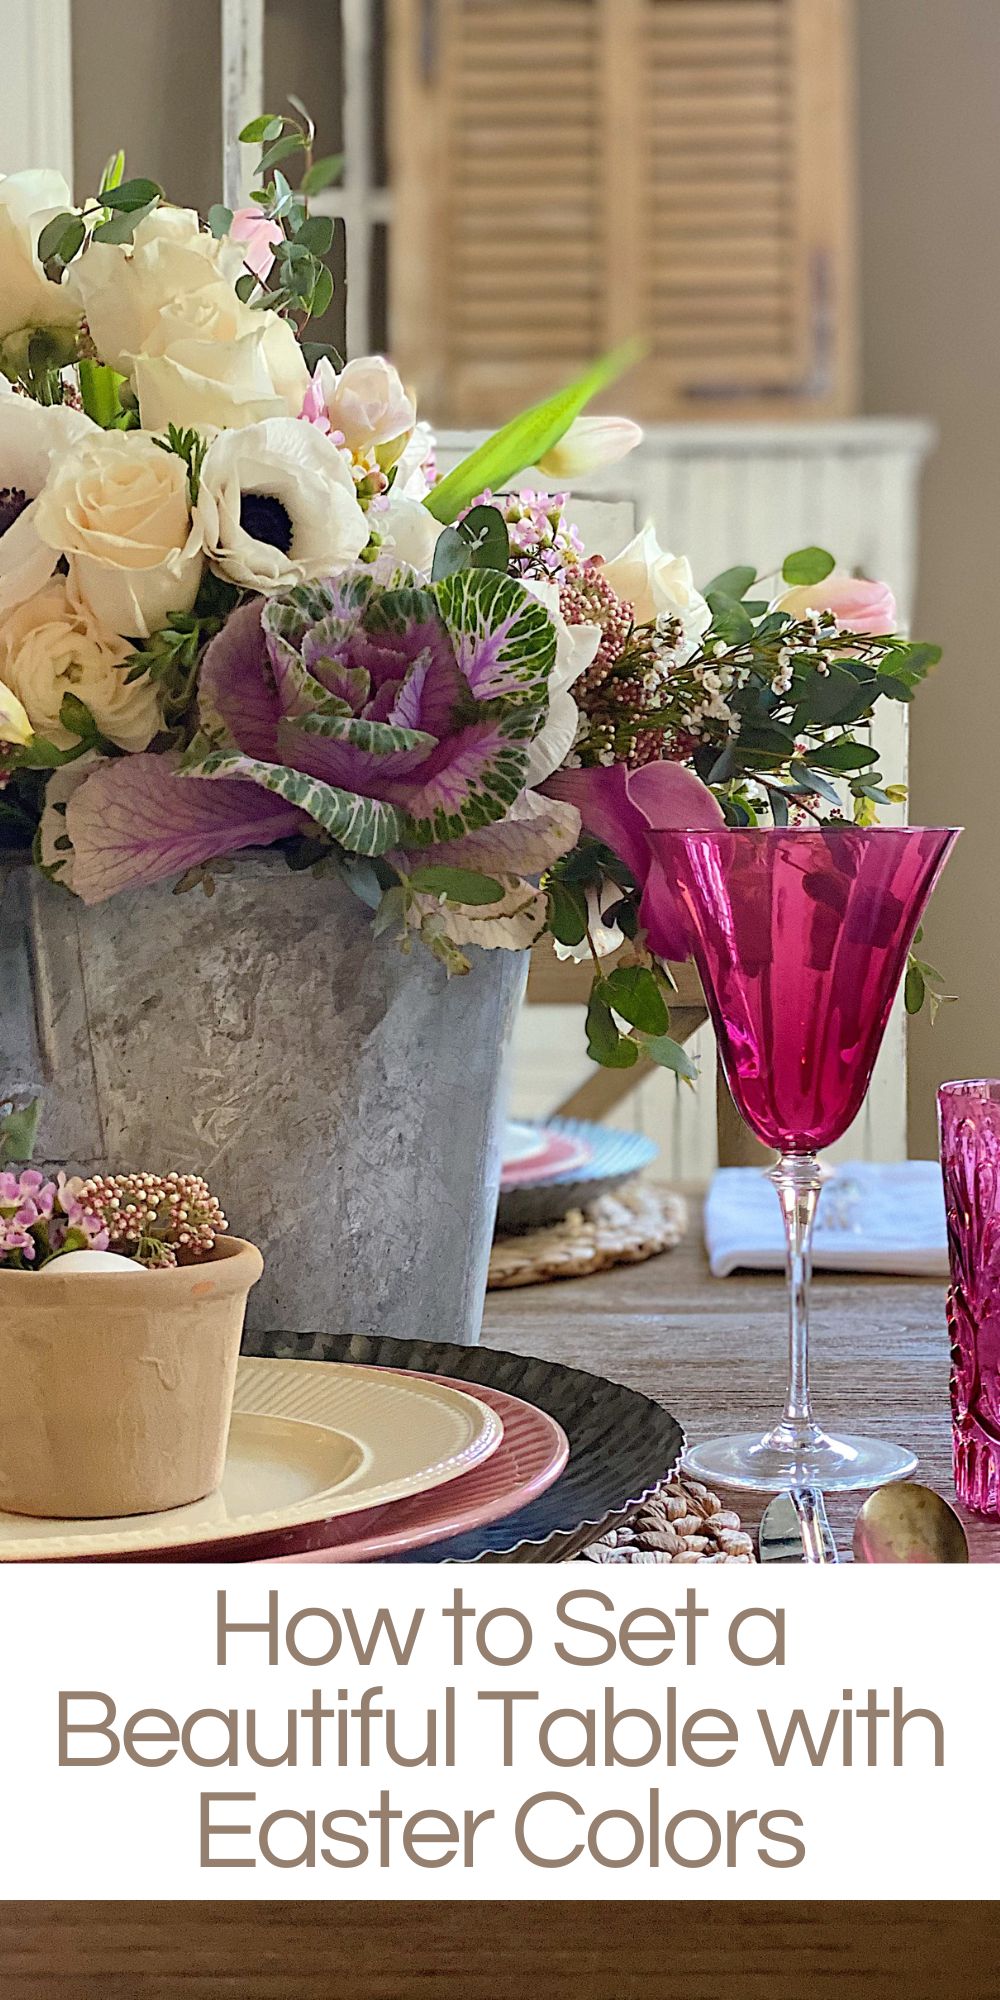 https://my100yearoldhome.com/wp-content/uploads/2023/04/How-to-Set-a-Beautiful-Table-with-Easter-Colors-1.jpg